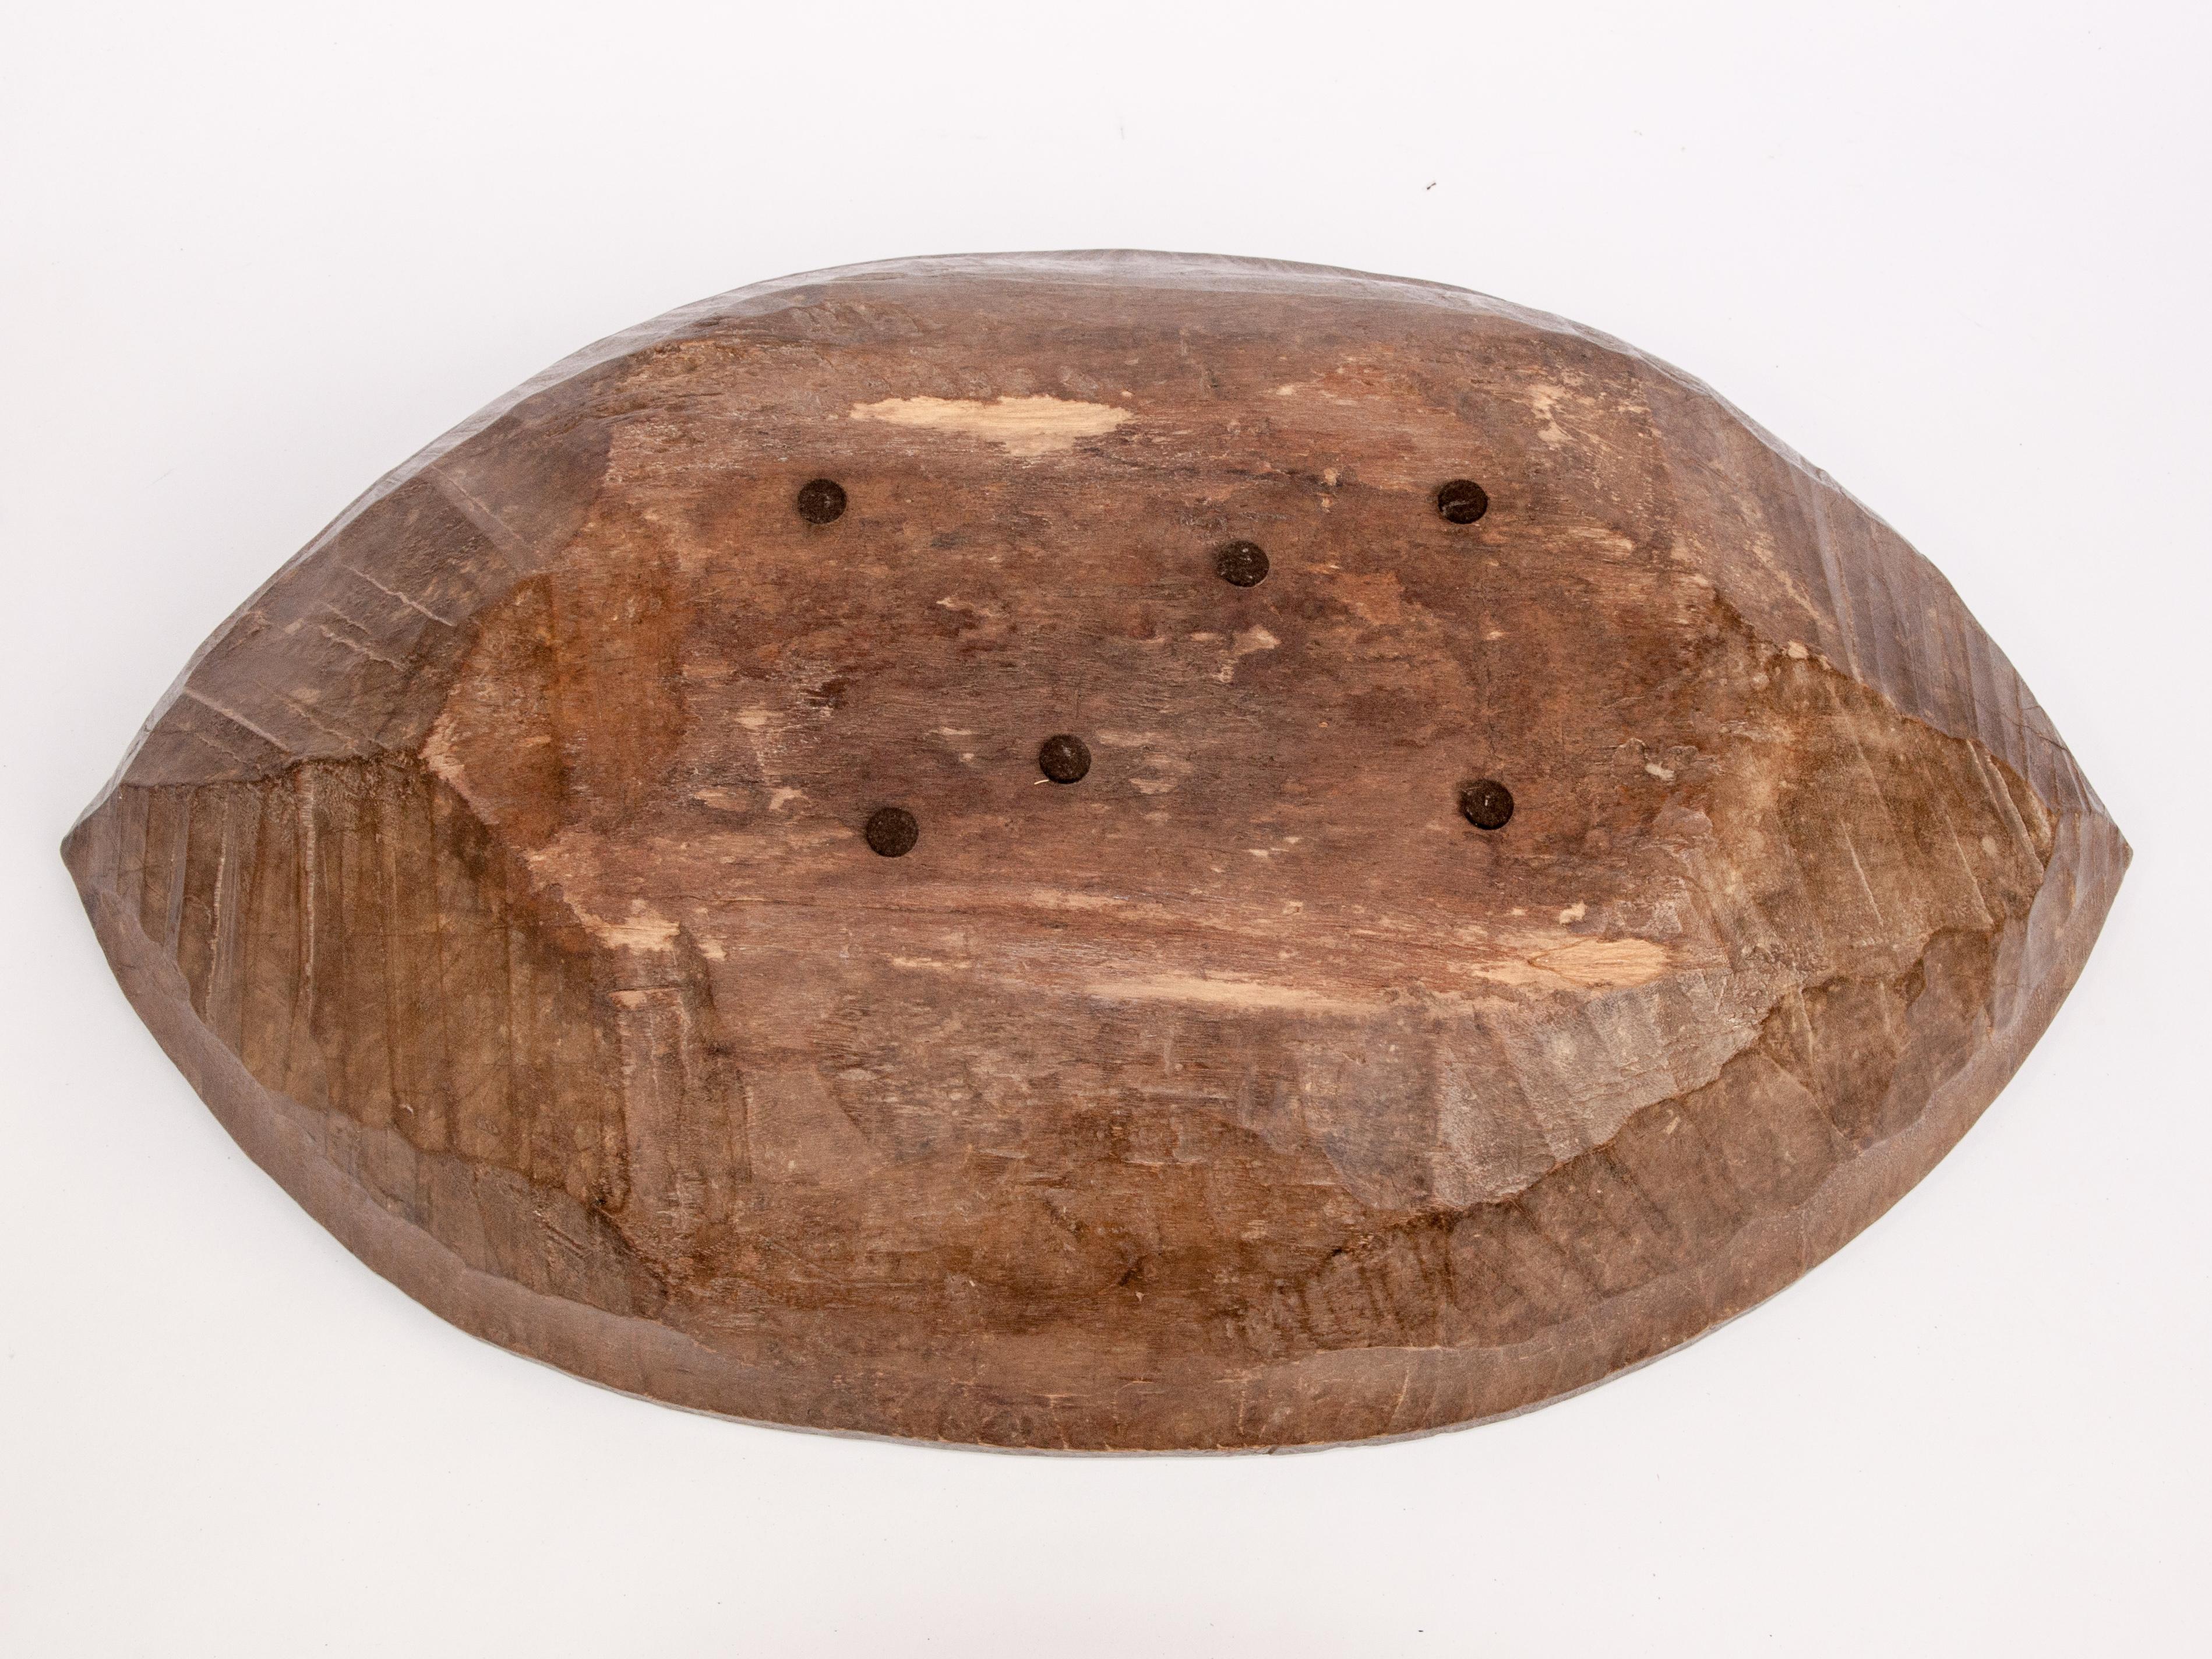 Tribal Hand Hewn Wooden Tray, Bowl, Mentawai Islands, Early to Mid-20th Century 14